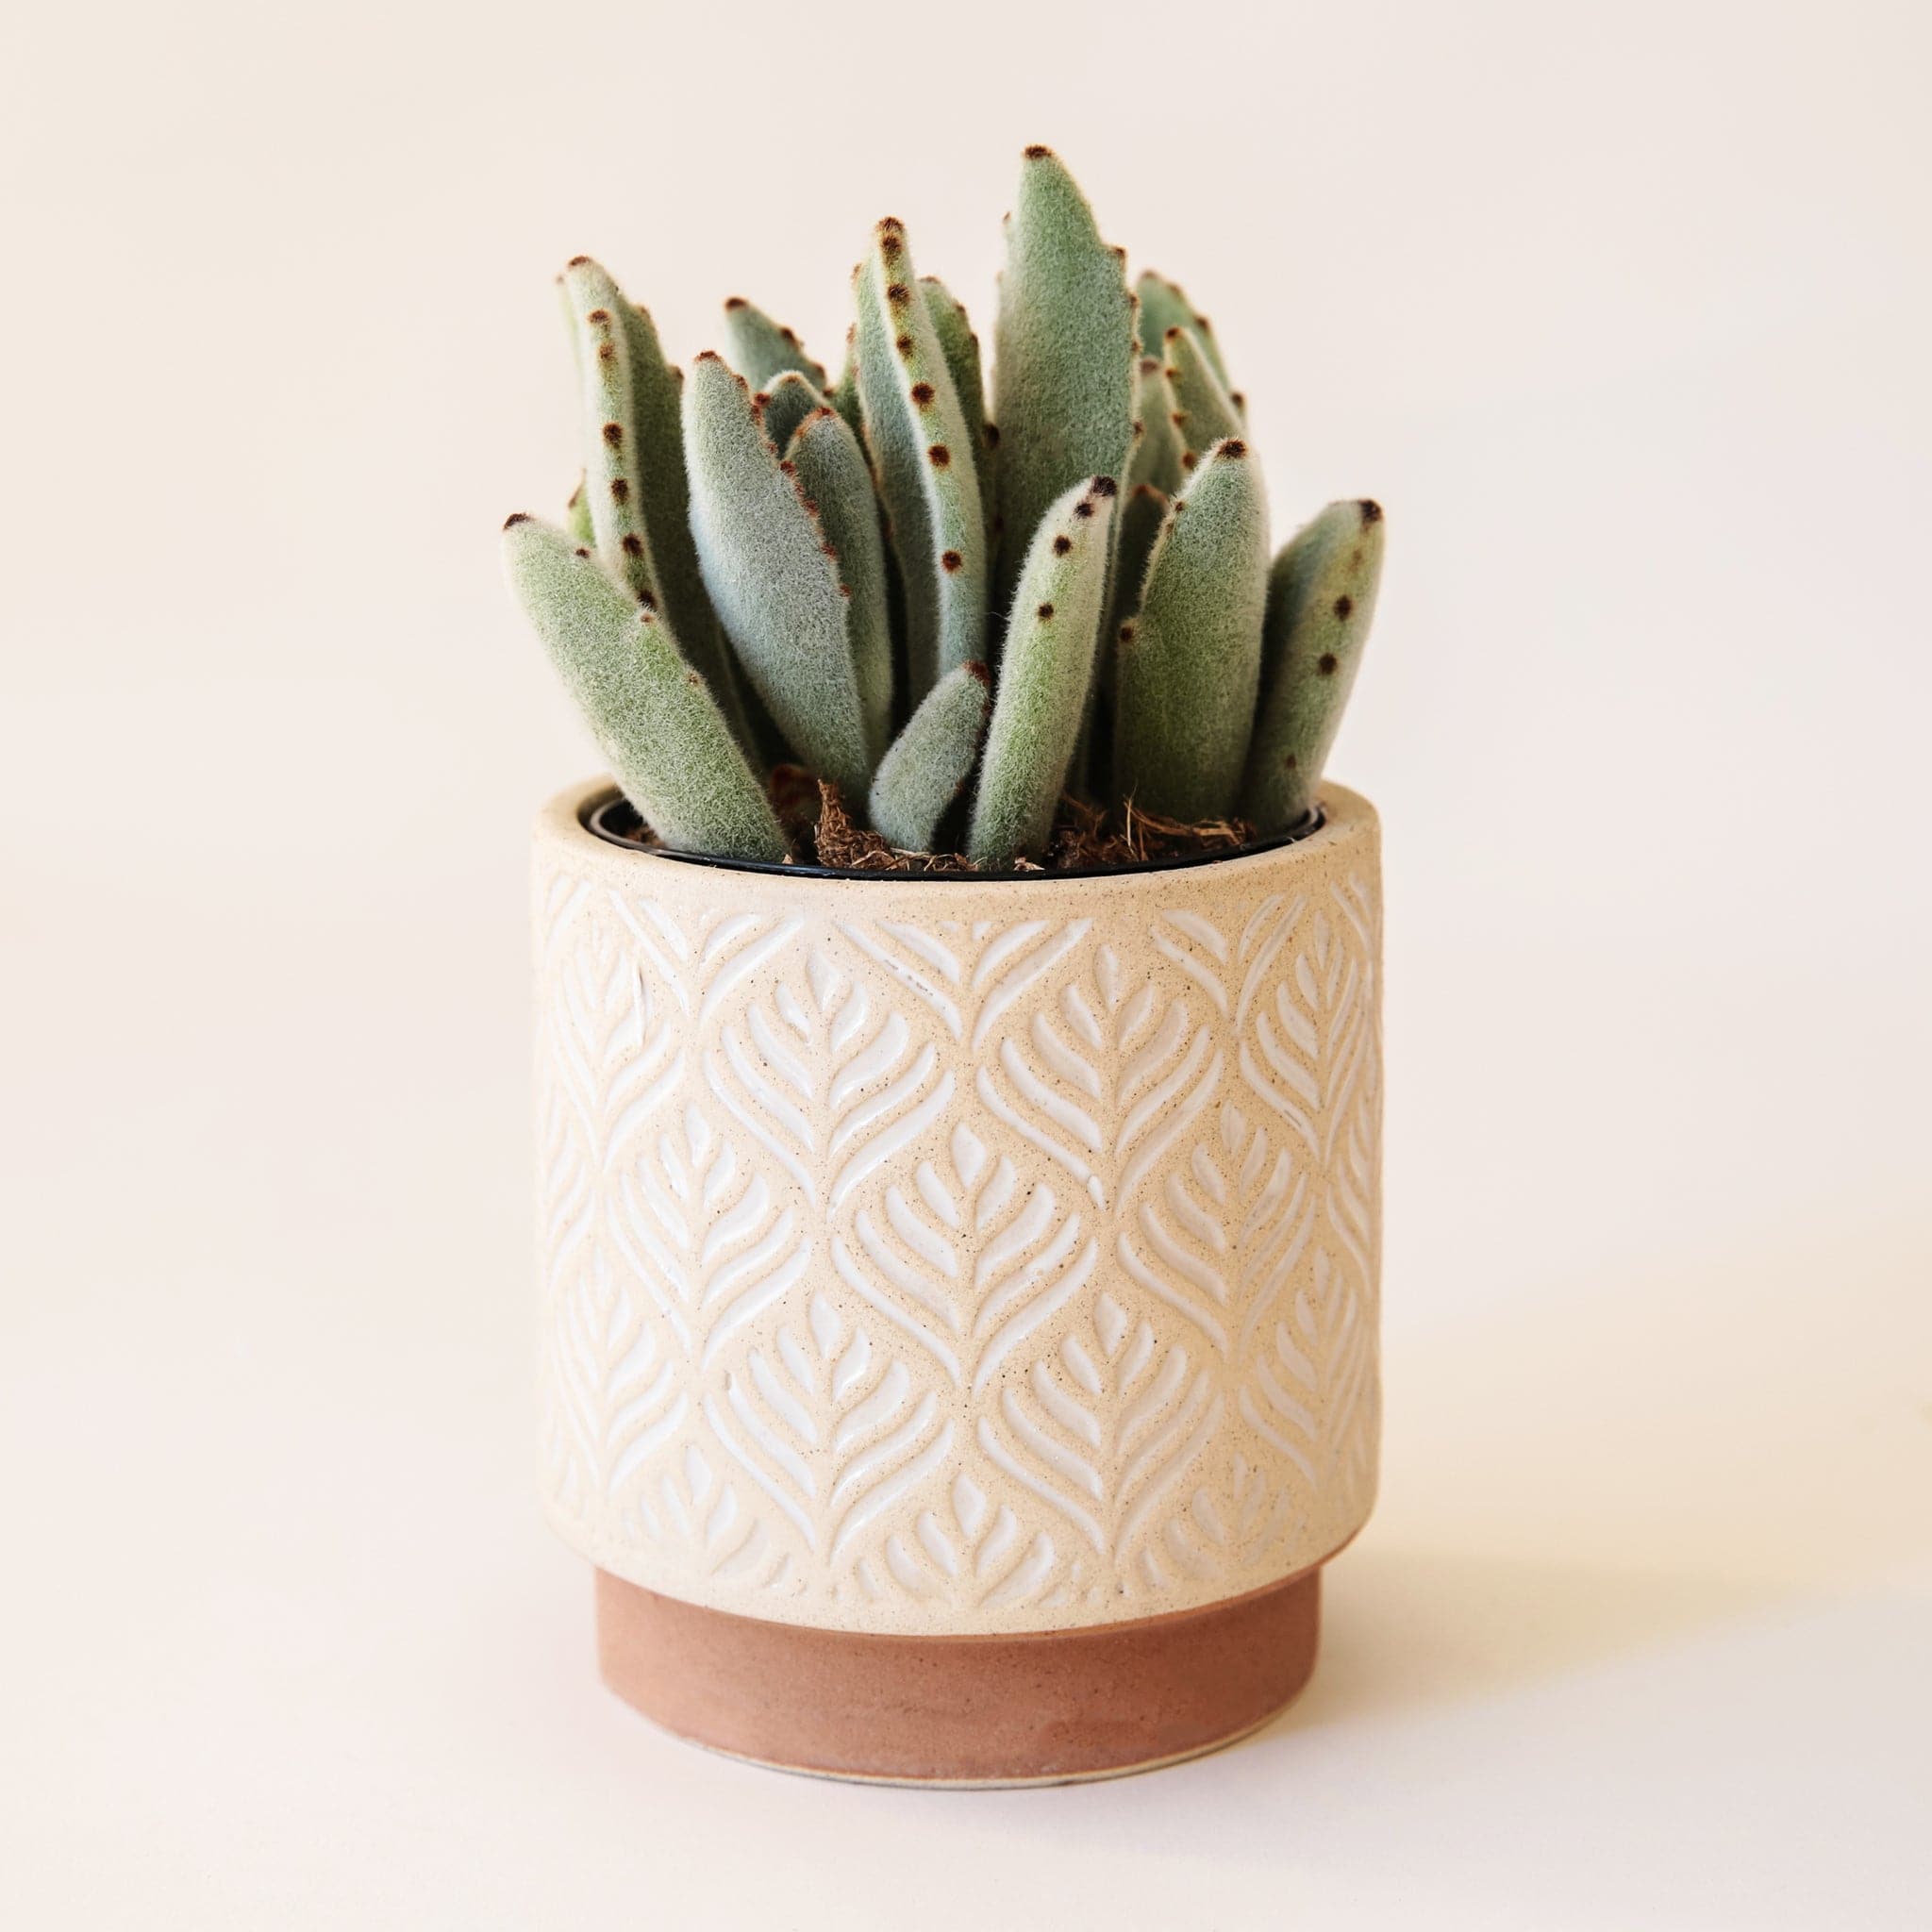 A pot where the bottom of the vessel is a smaller size then the portion that holds the plant. The bottom of the vessel is a dark tan while the top color is lighter with white imprinted abstract leaf pattern.